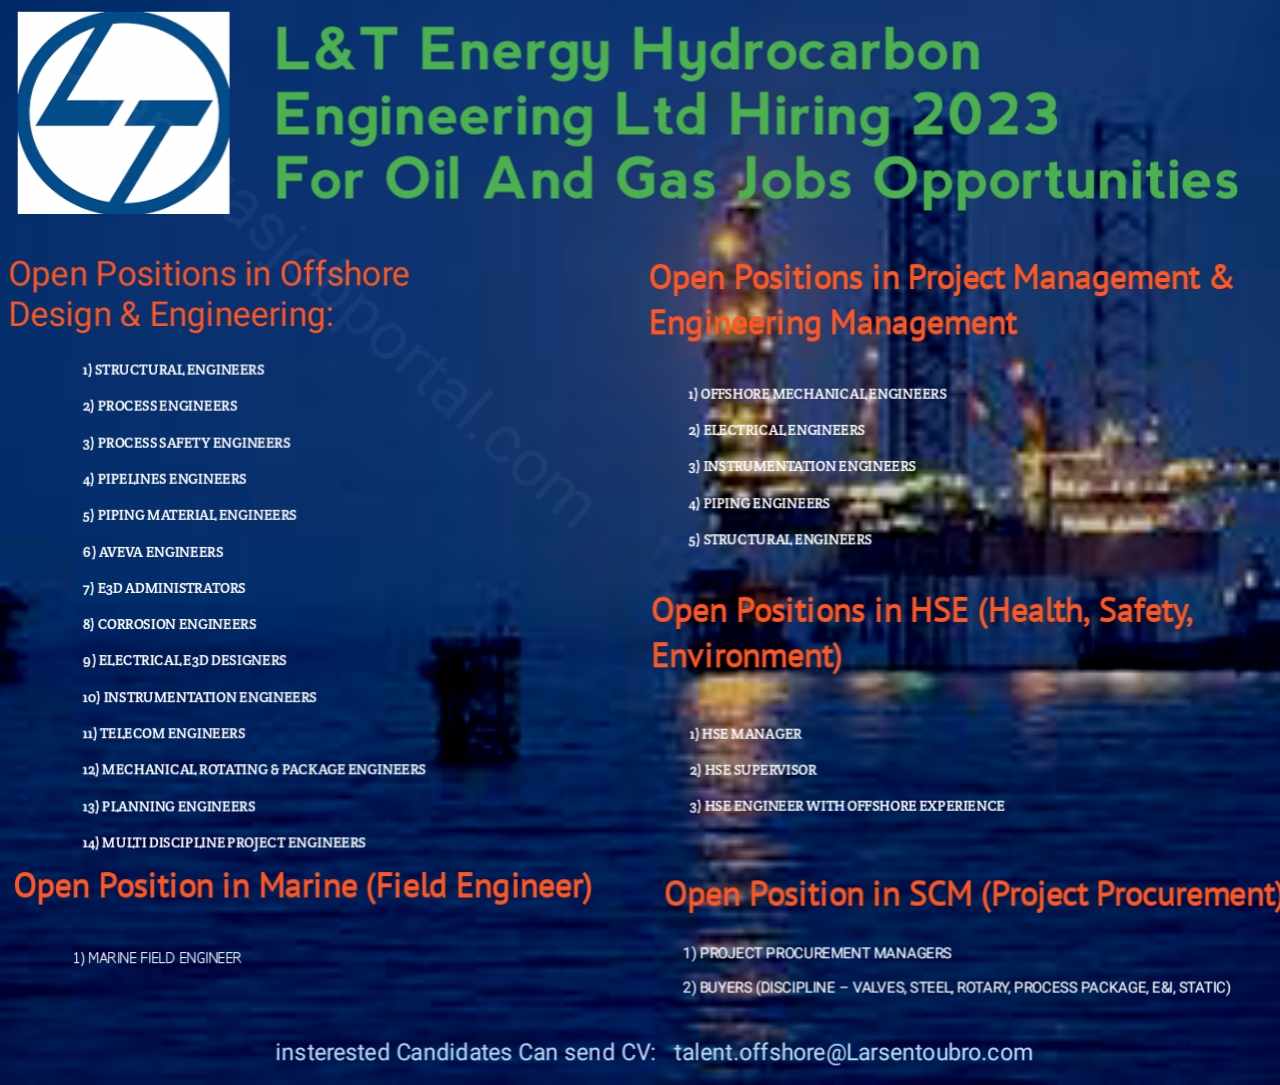 L&T Energy Hydrocarbon Engineering Ltd Hiring 2023 For Oil And Gas Jobs Opportunities 